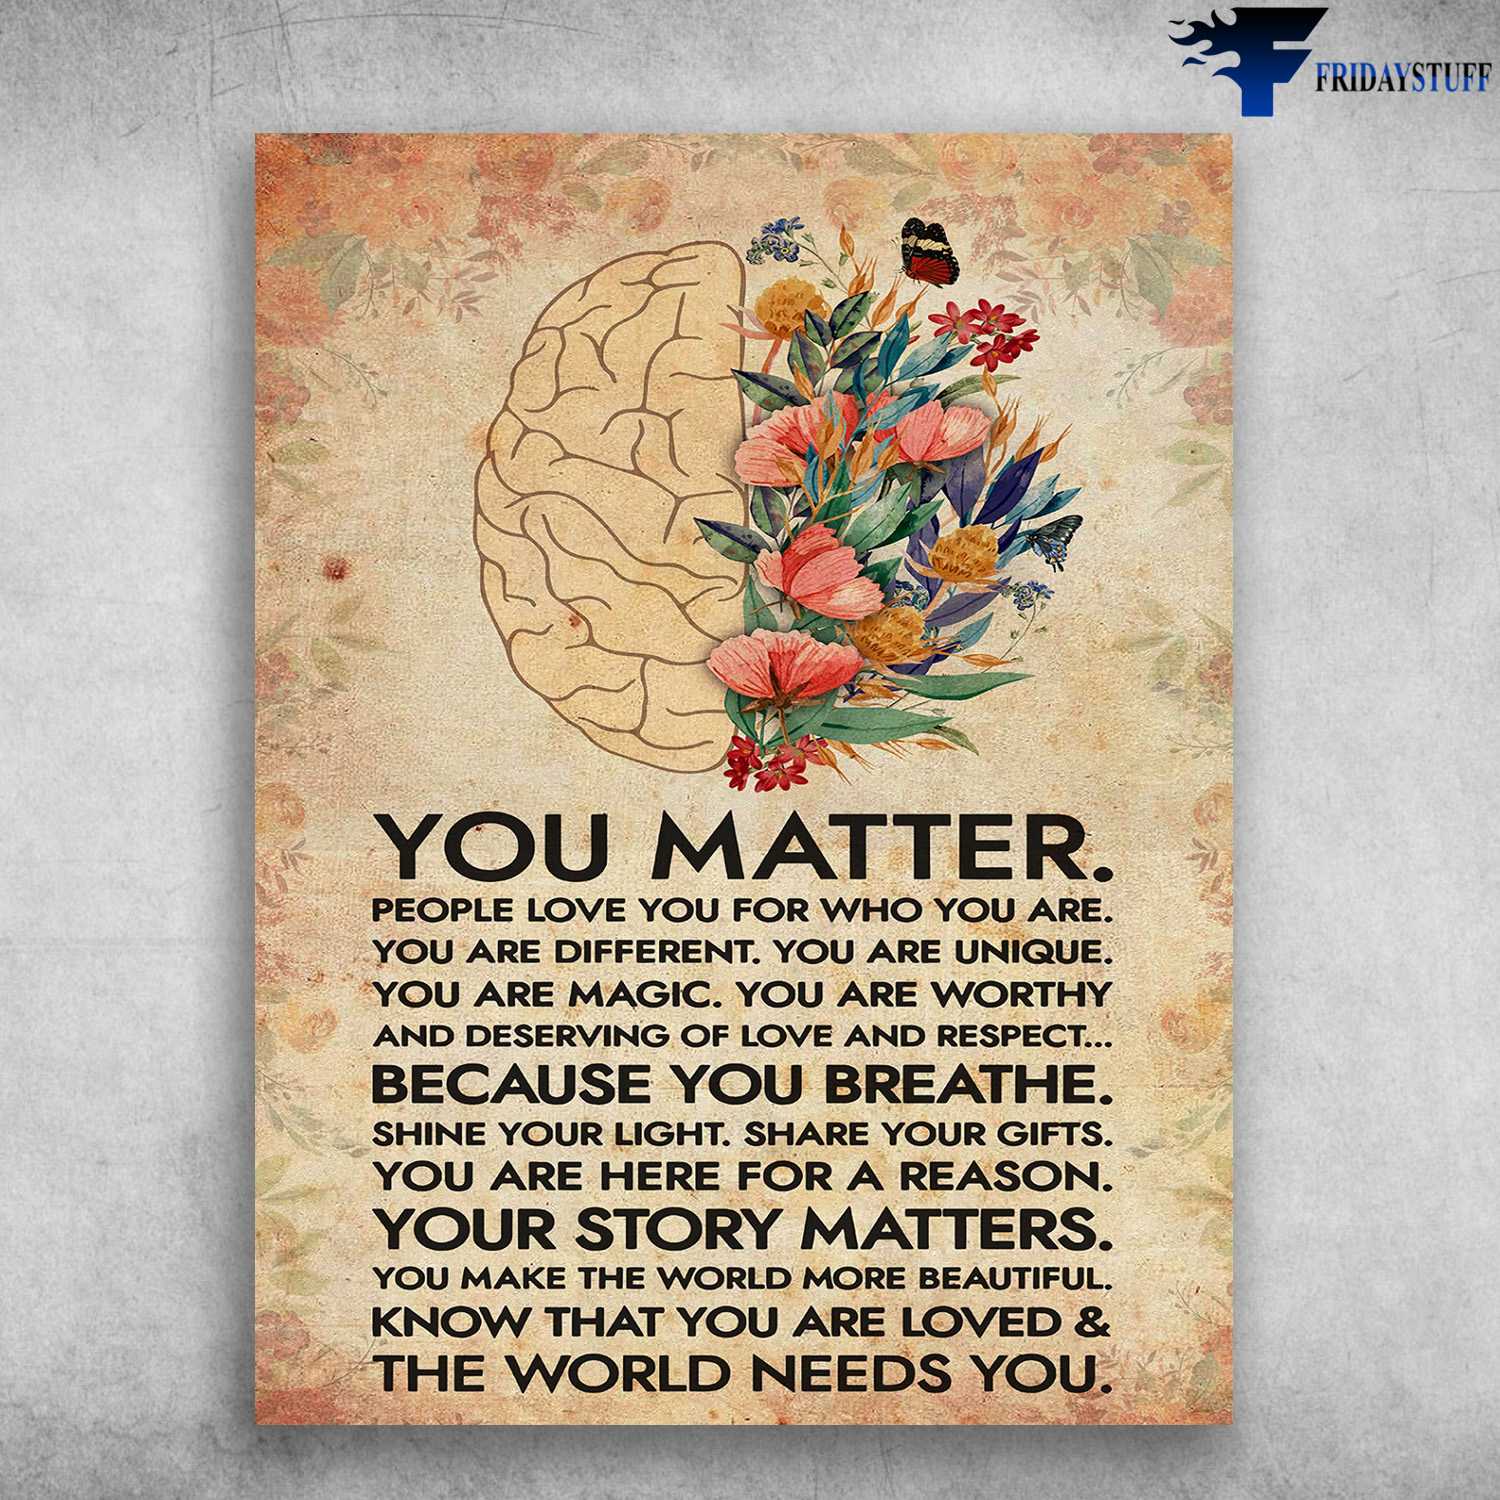 Beautiful Mind, You Matter, People Love You For Who You Are, You Are Different, You Are Unique, You Are Different, You Are Unique, You Are Magic, You Are Worthy, And Deserving Of Love